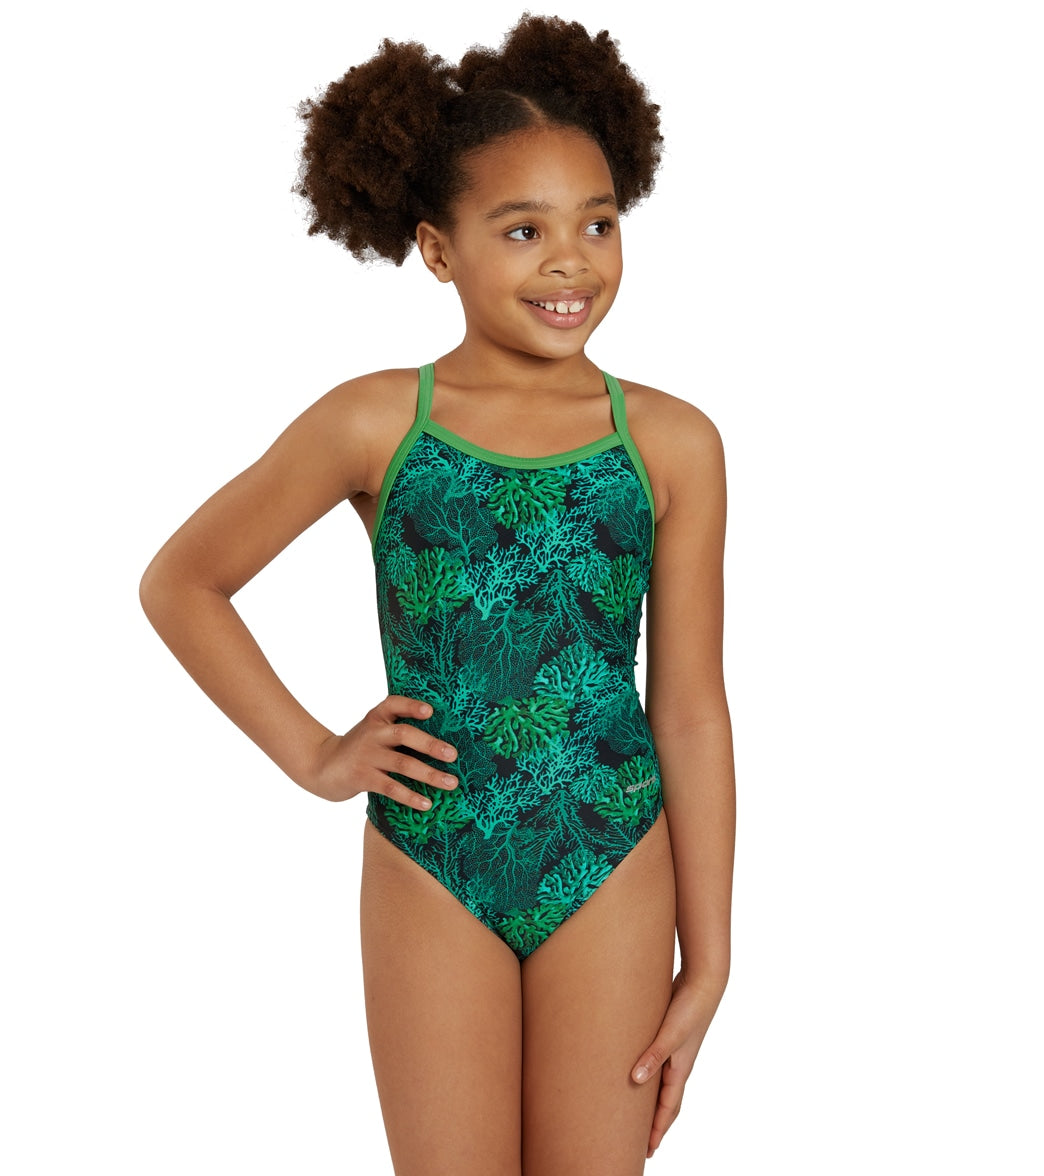 Sporti Coral Reef Thin Strap One Piece Swimsuit Youth (22 - 28)